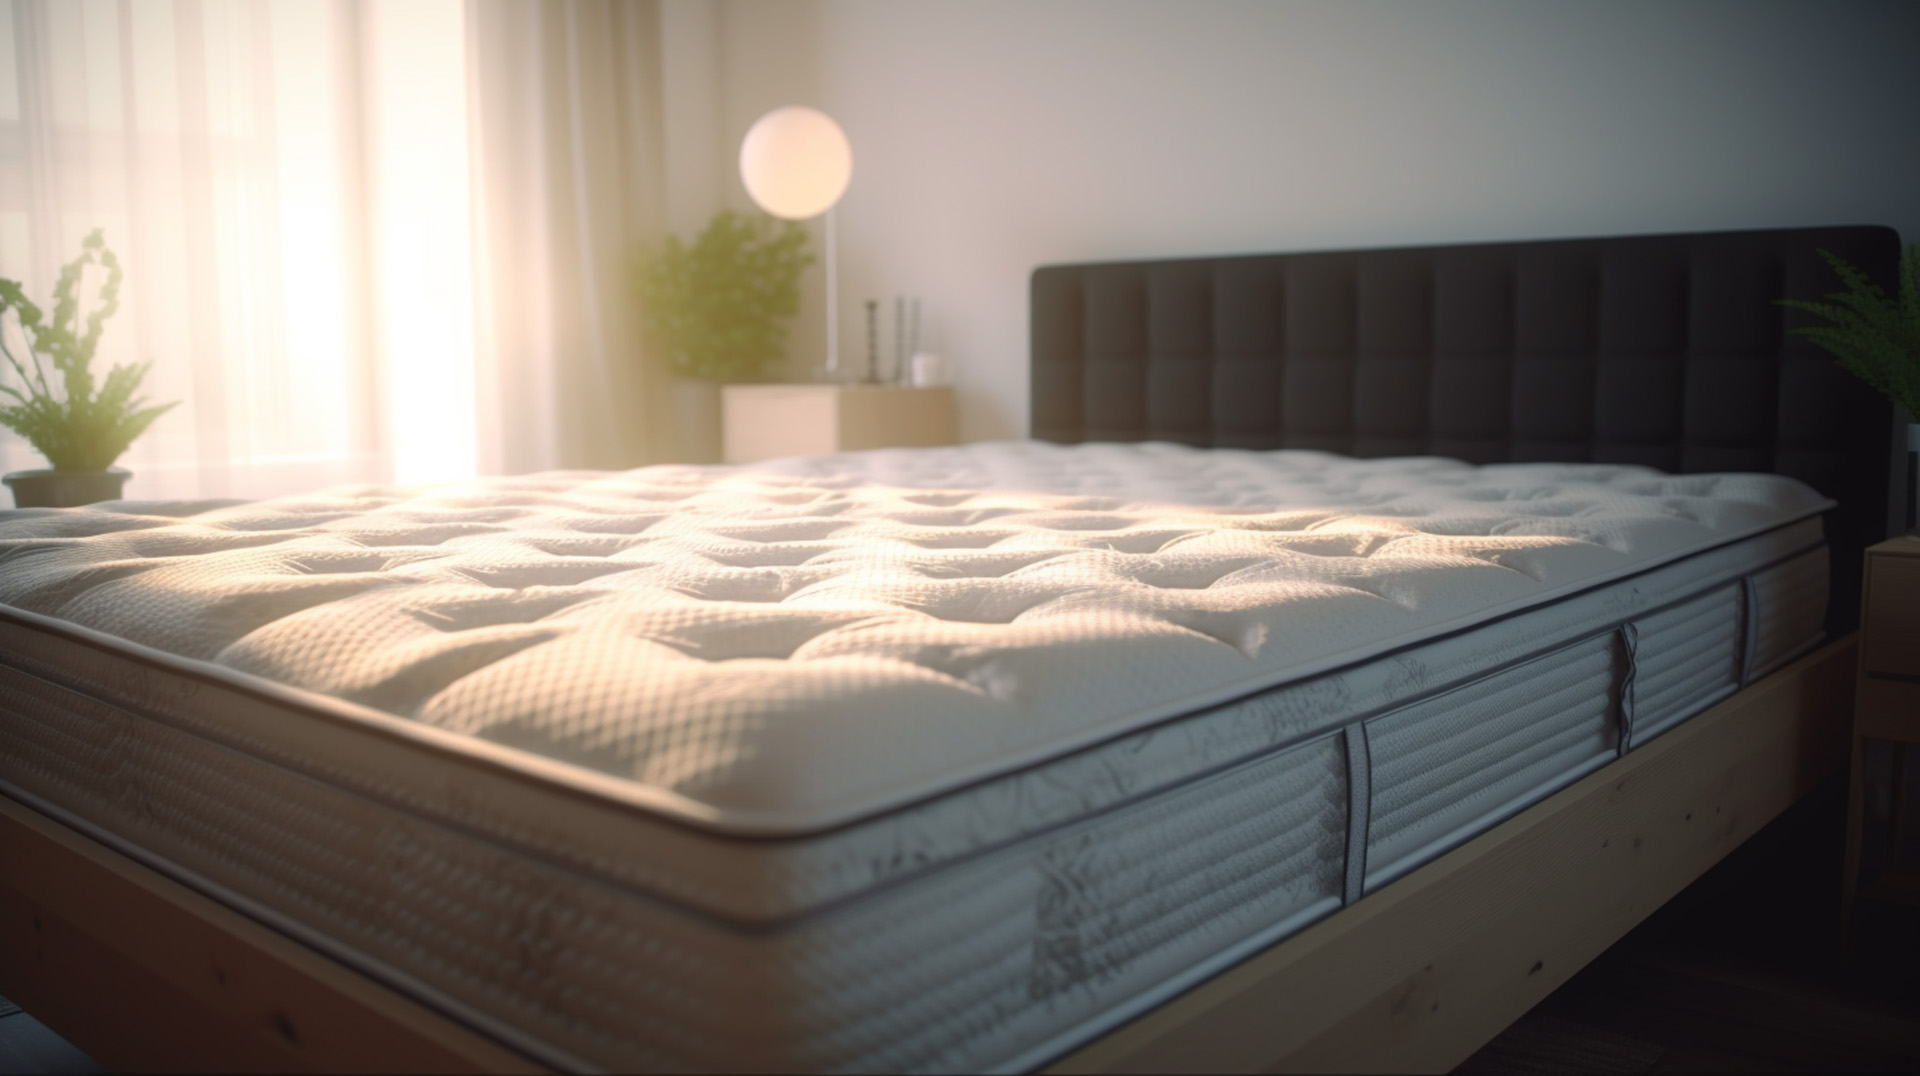 Shop Organic Mattresses and Beds in Orem, UT